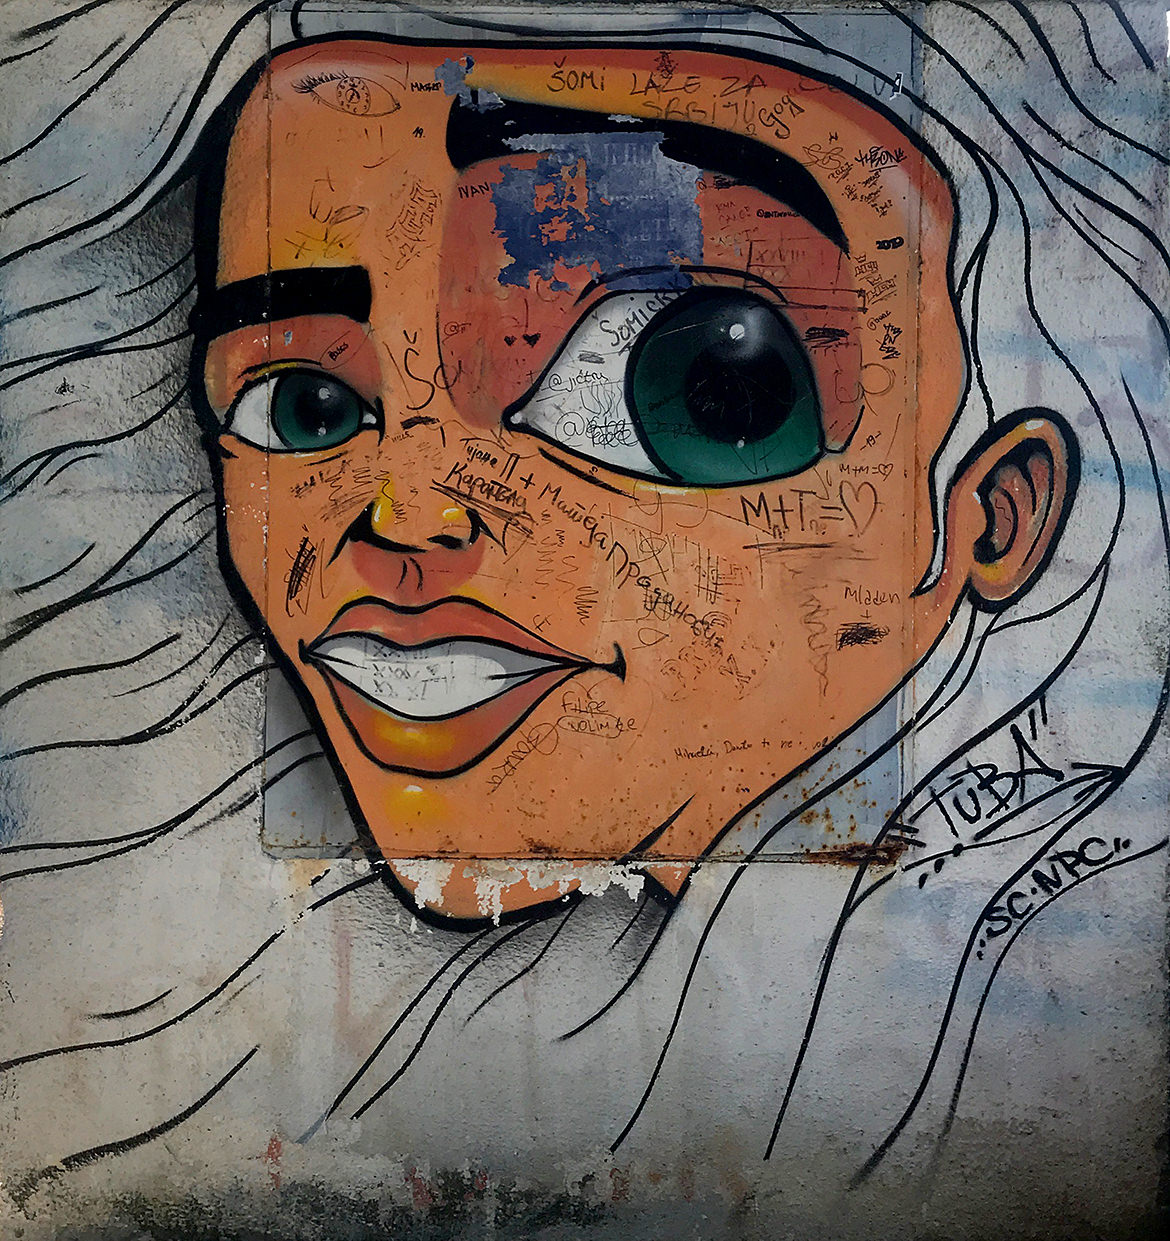 A graffiti painting of a woman with one giant eye and white wavy hair